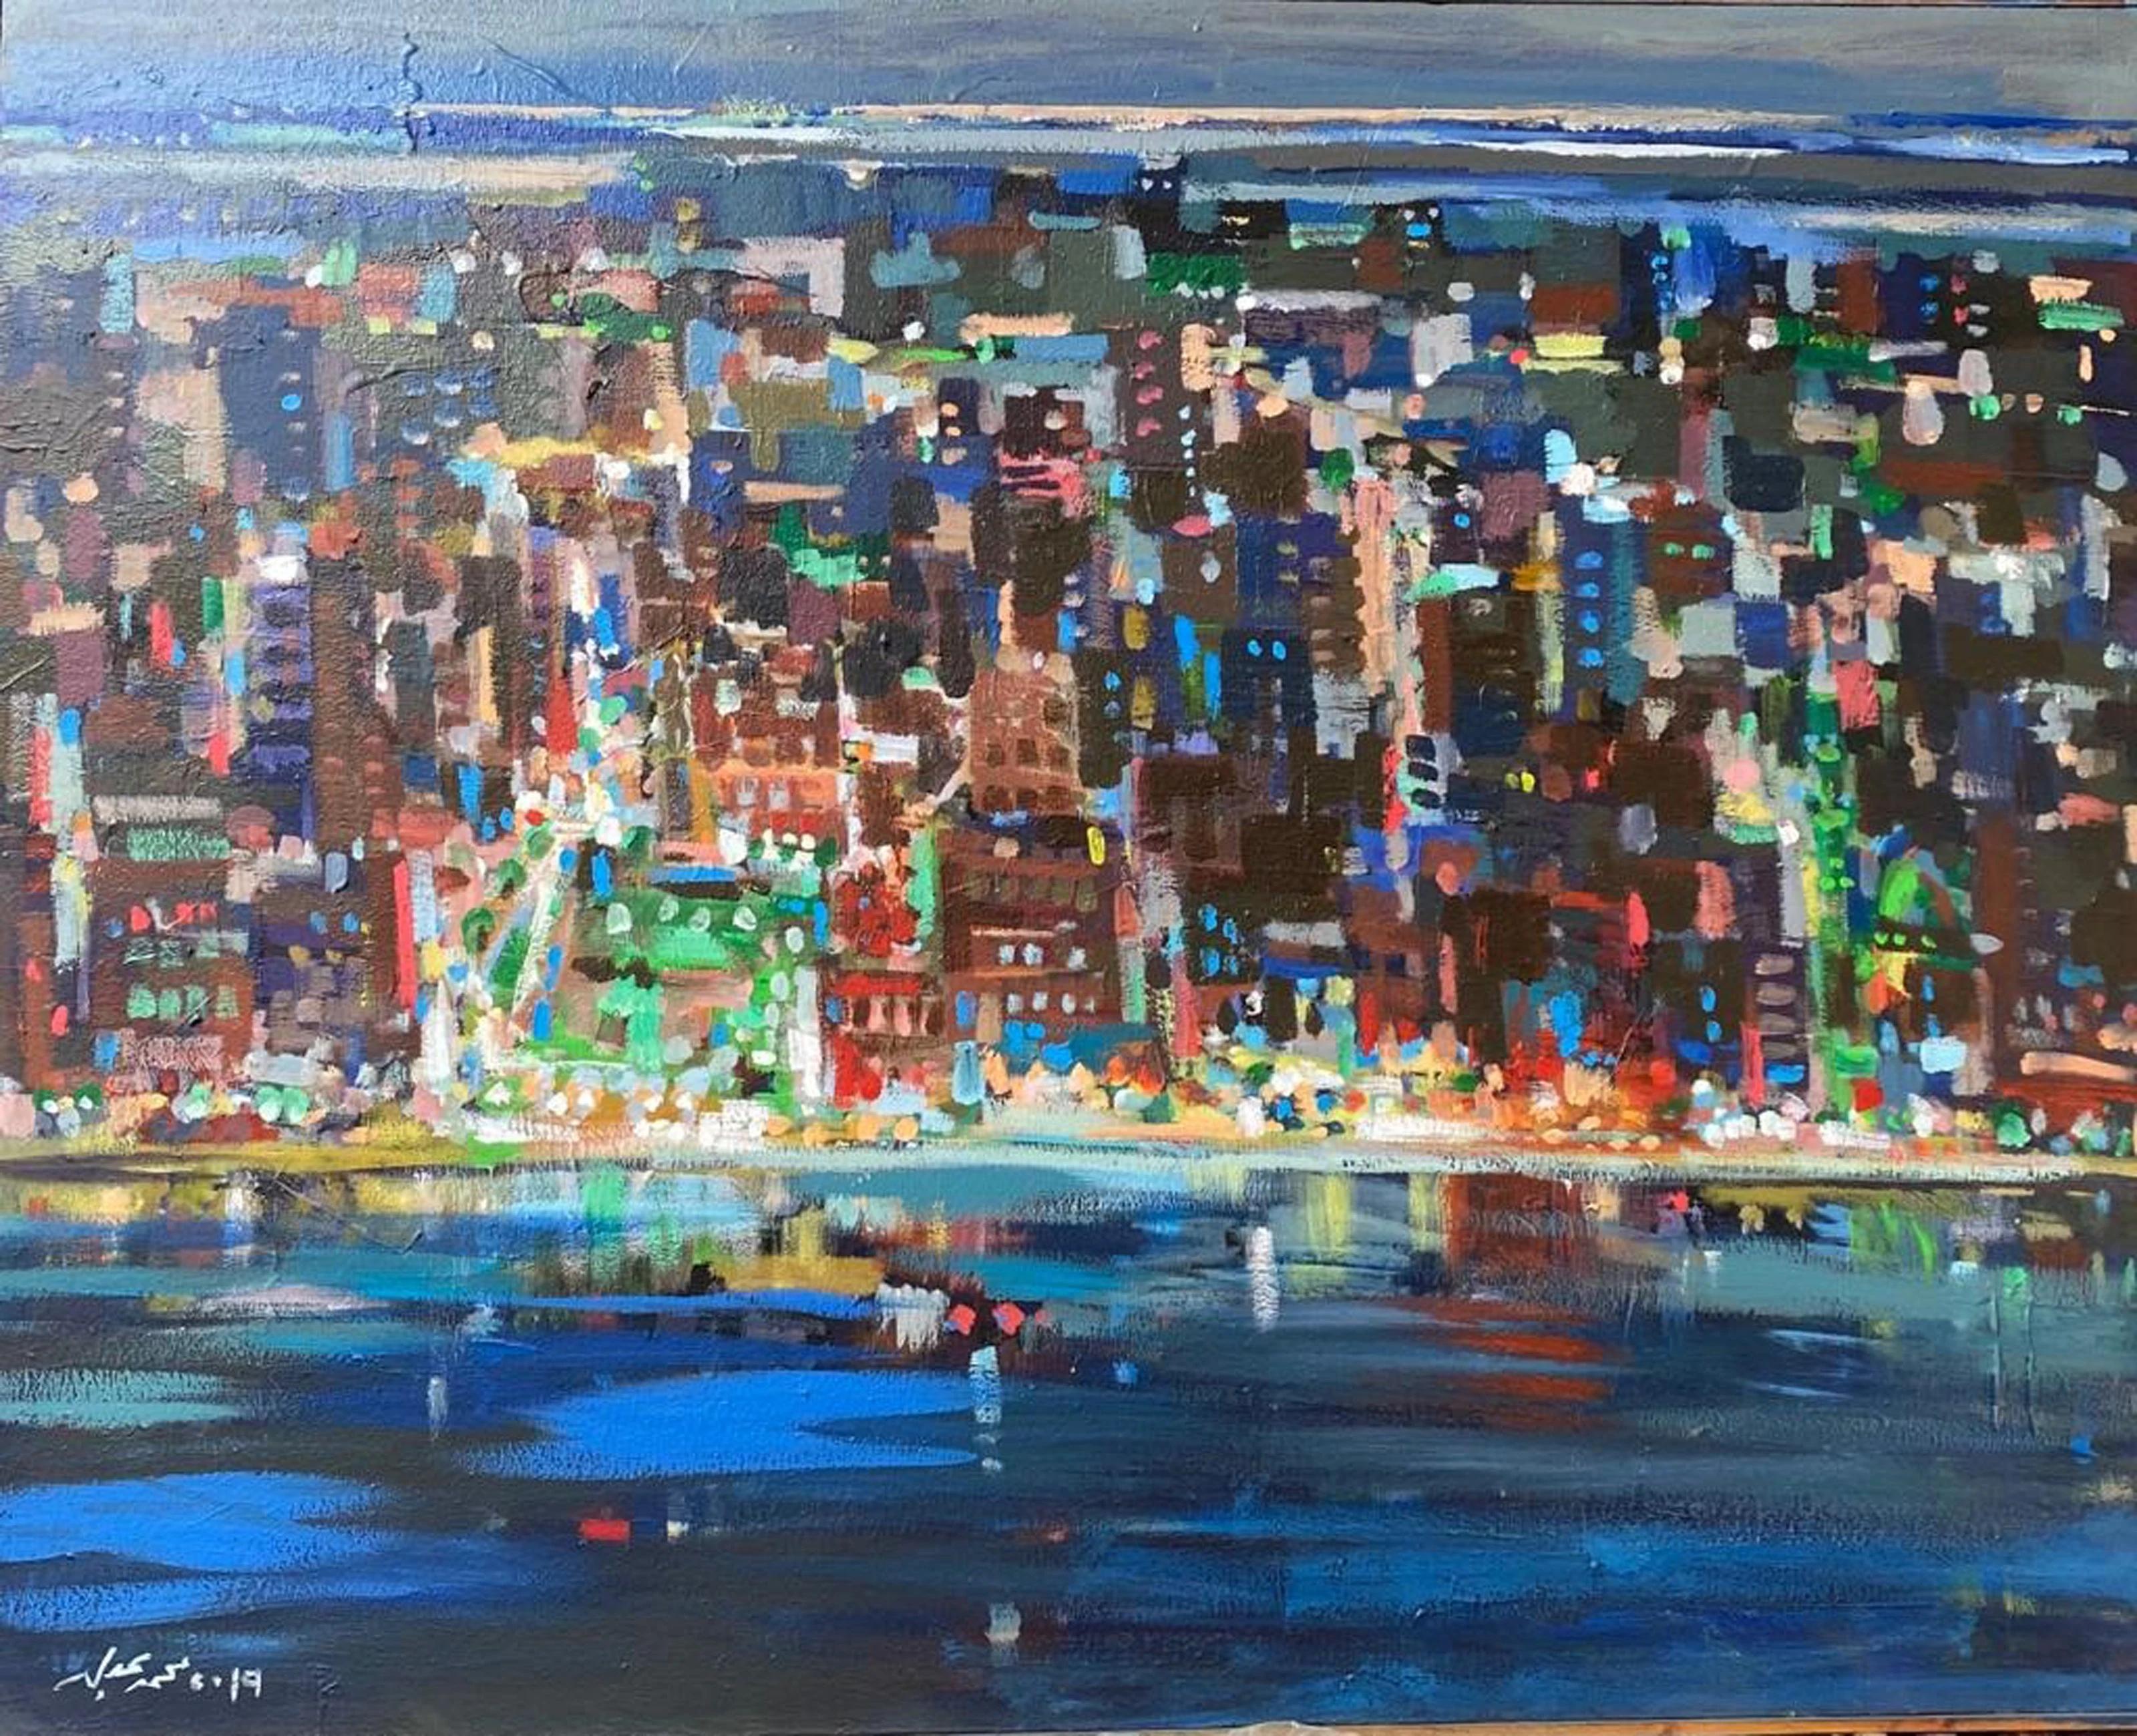 "Nile by Night III" Painting 47" x 63" inch by Mohamed Abla


Mohamed Abla was born in Mansoura (North of Egypt) in 1953. There he spent his childhood and finished school. In 1973 he moved to Alexandria to start a five-year art study at the faculty